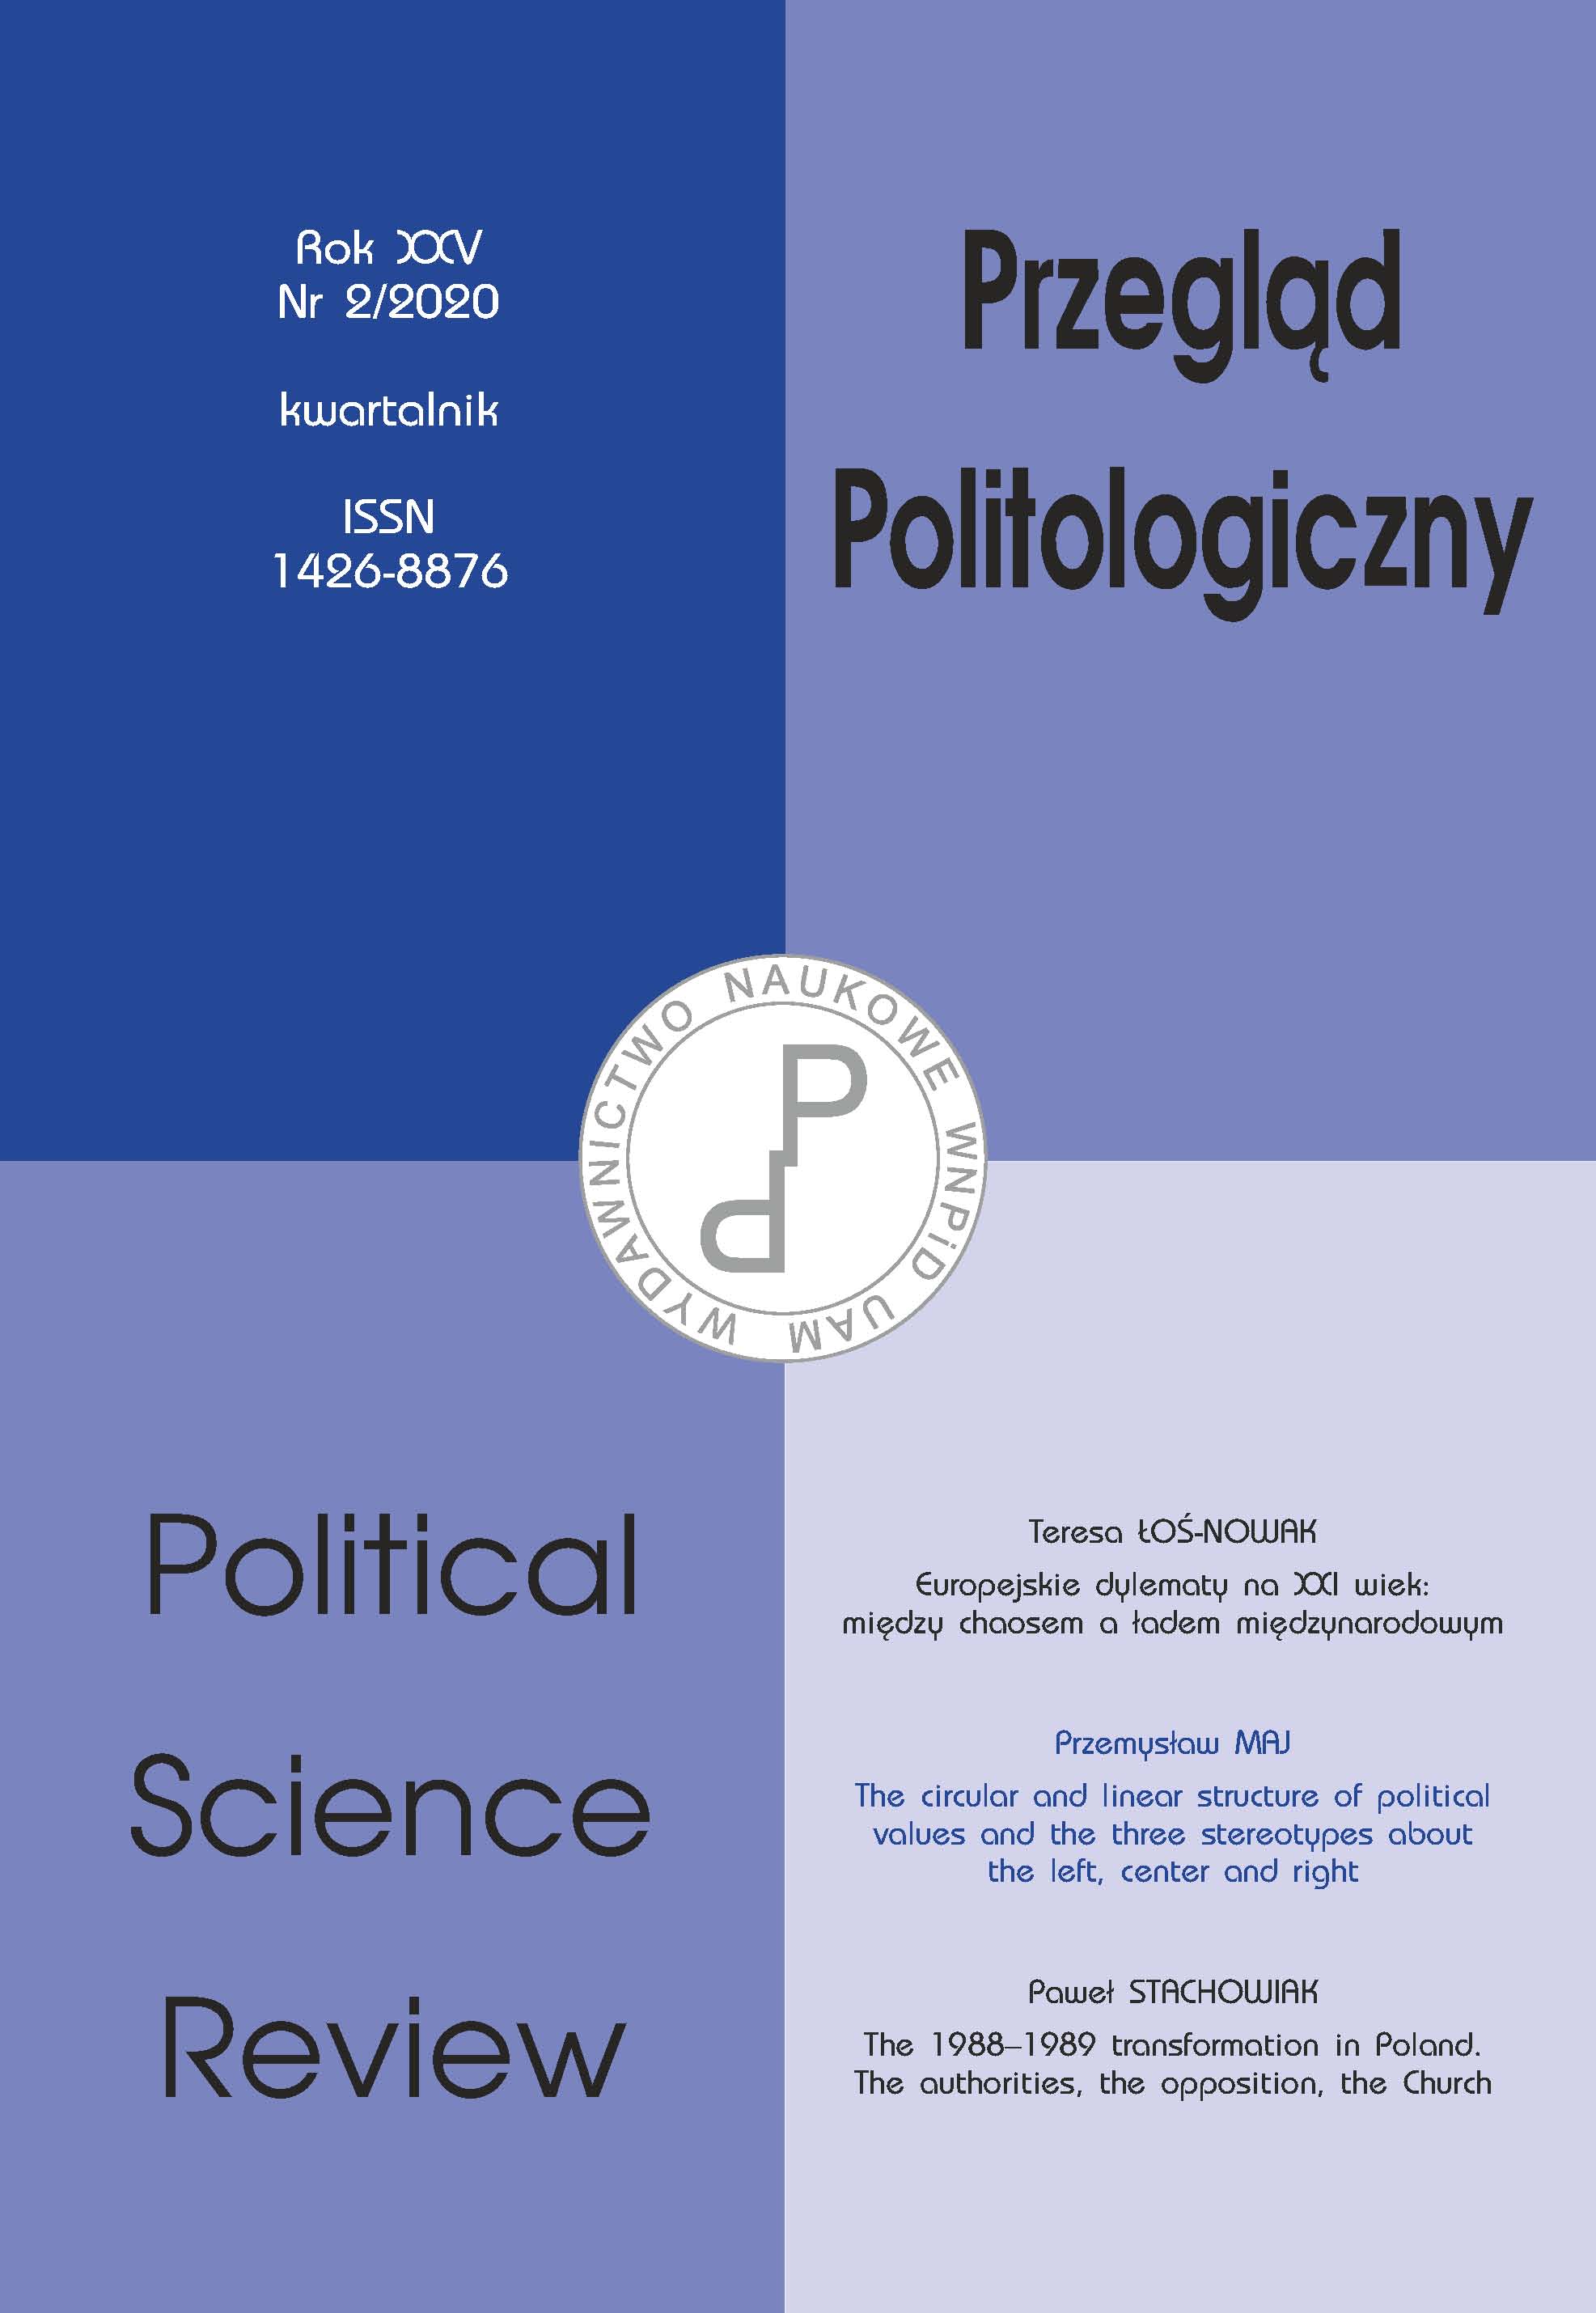 Political parties and their electorates. From sympathy to antagonism. Based on the Civic Platform (PO) and Law and Justice (PiS) Cover Image